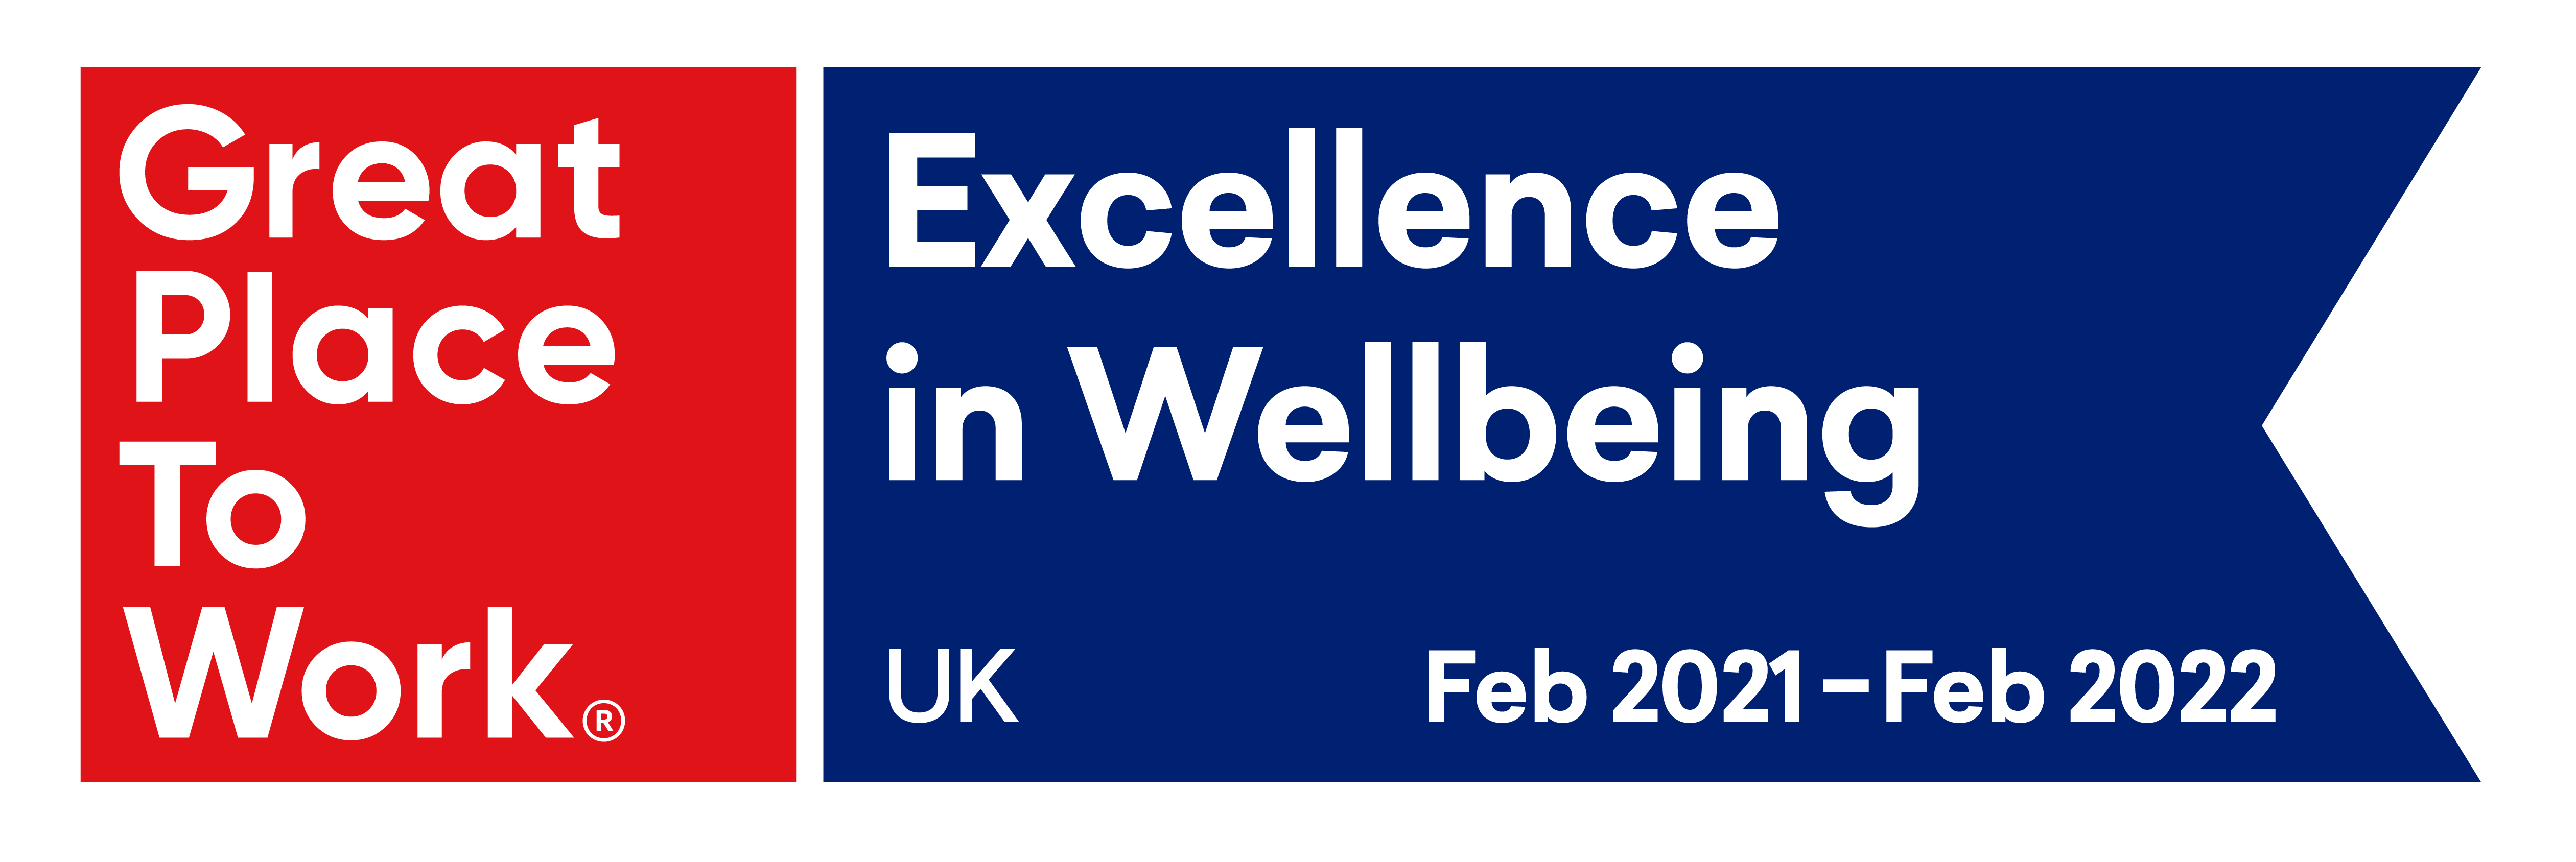 Recognised by Great Place to Work® UK as a centre for Excellence in Wellbeing